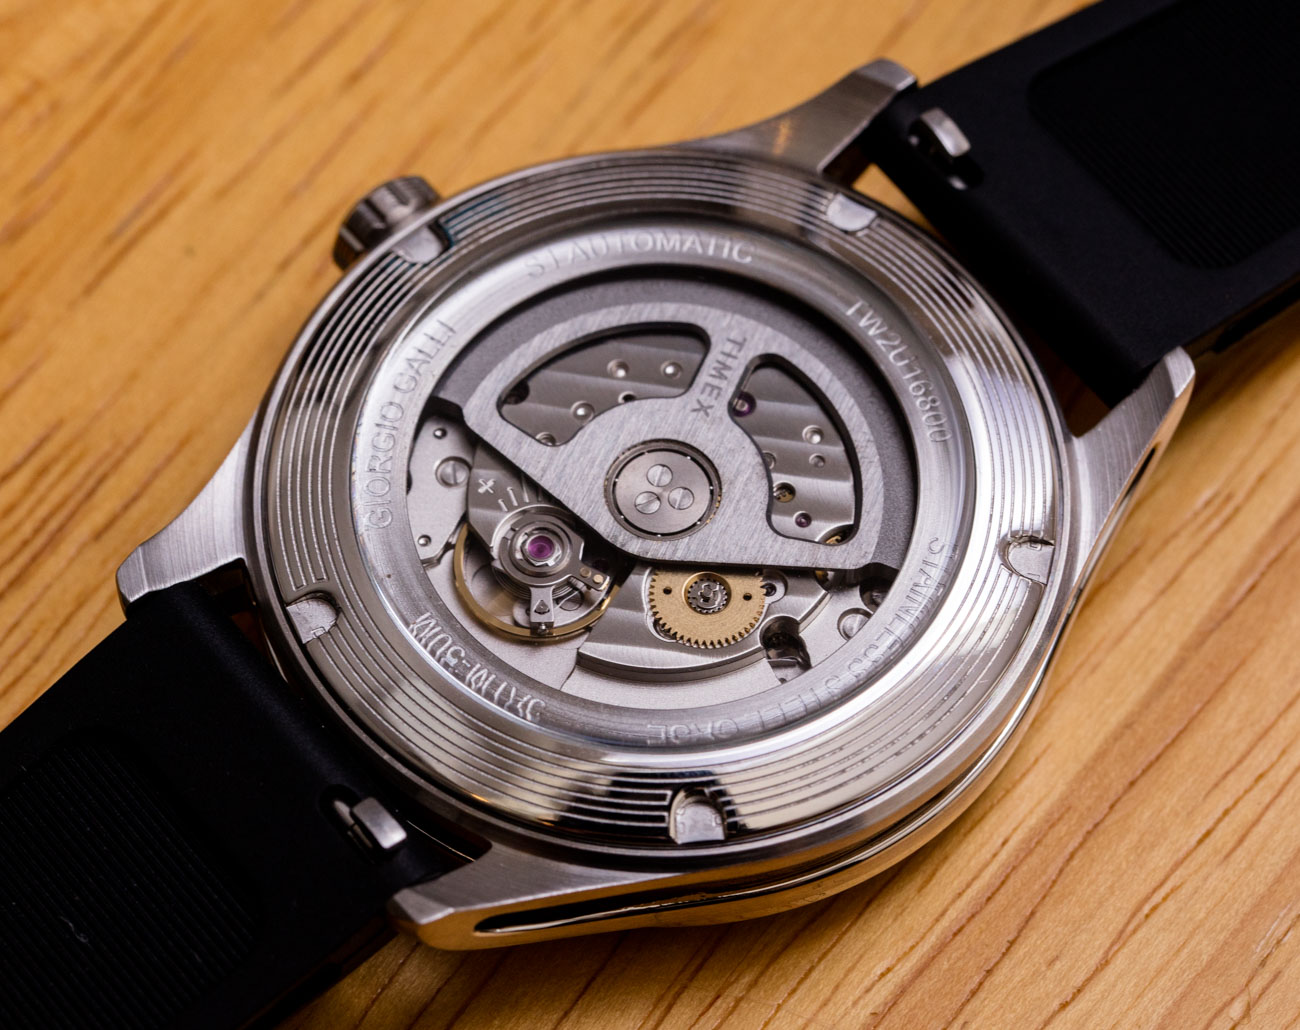 Hands-On Debut: Giorgio Galli S1 Automatic Watch By Timex | aBlogtoWatch